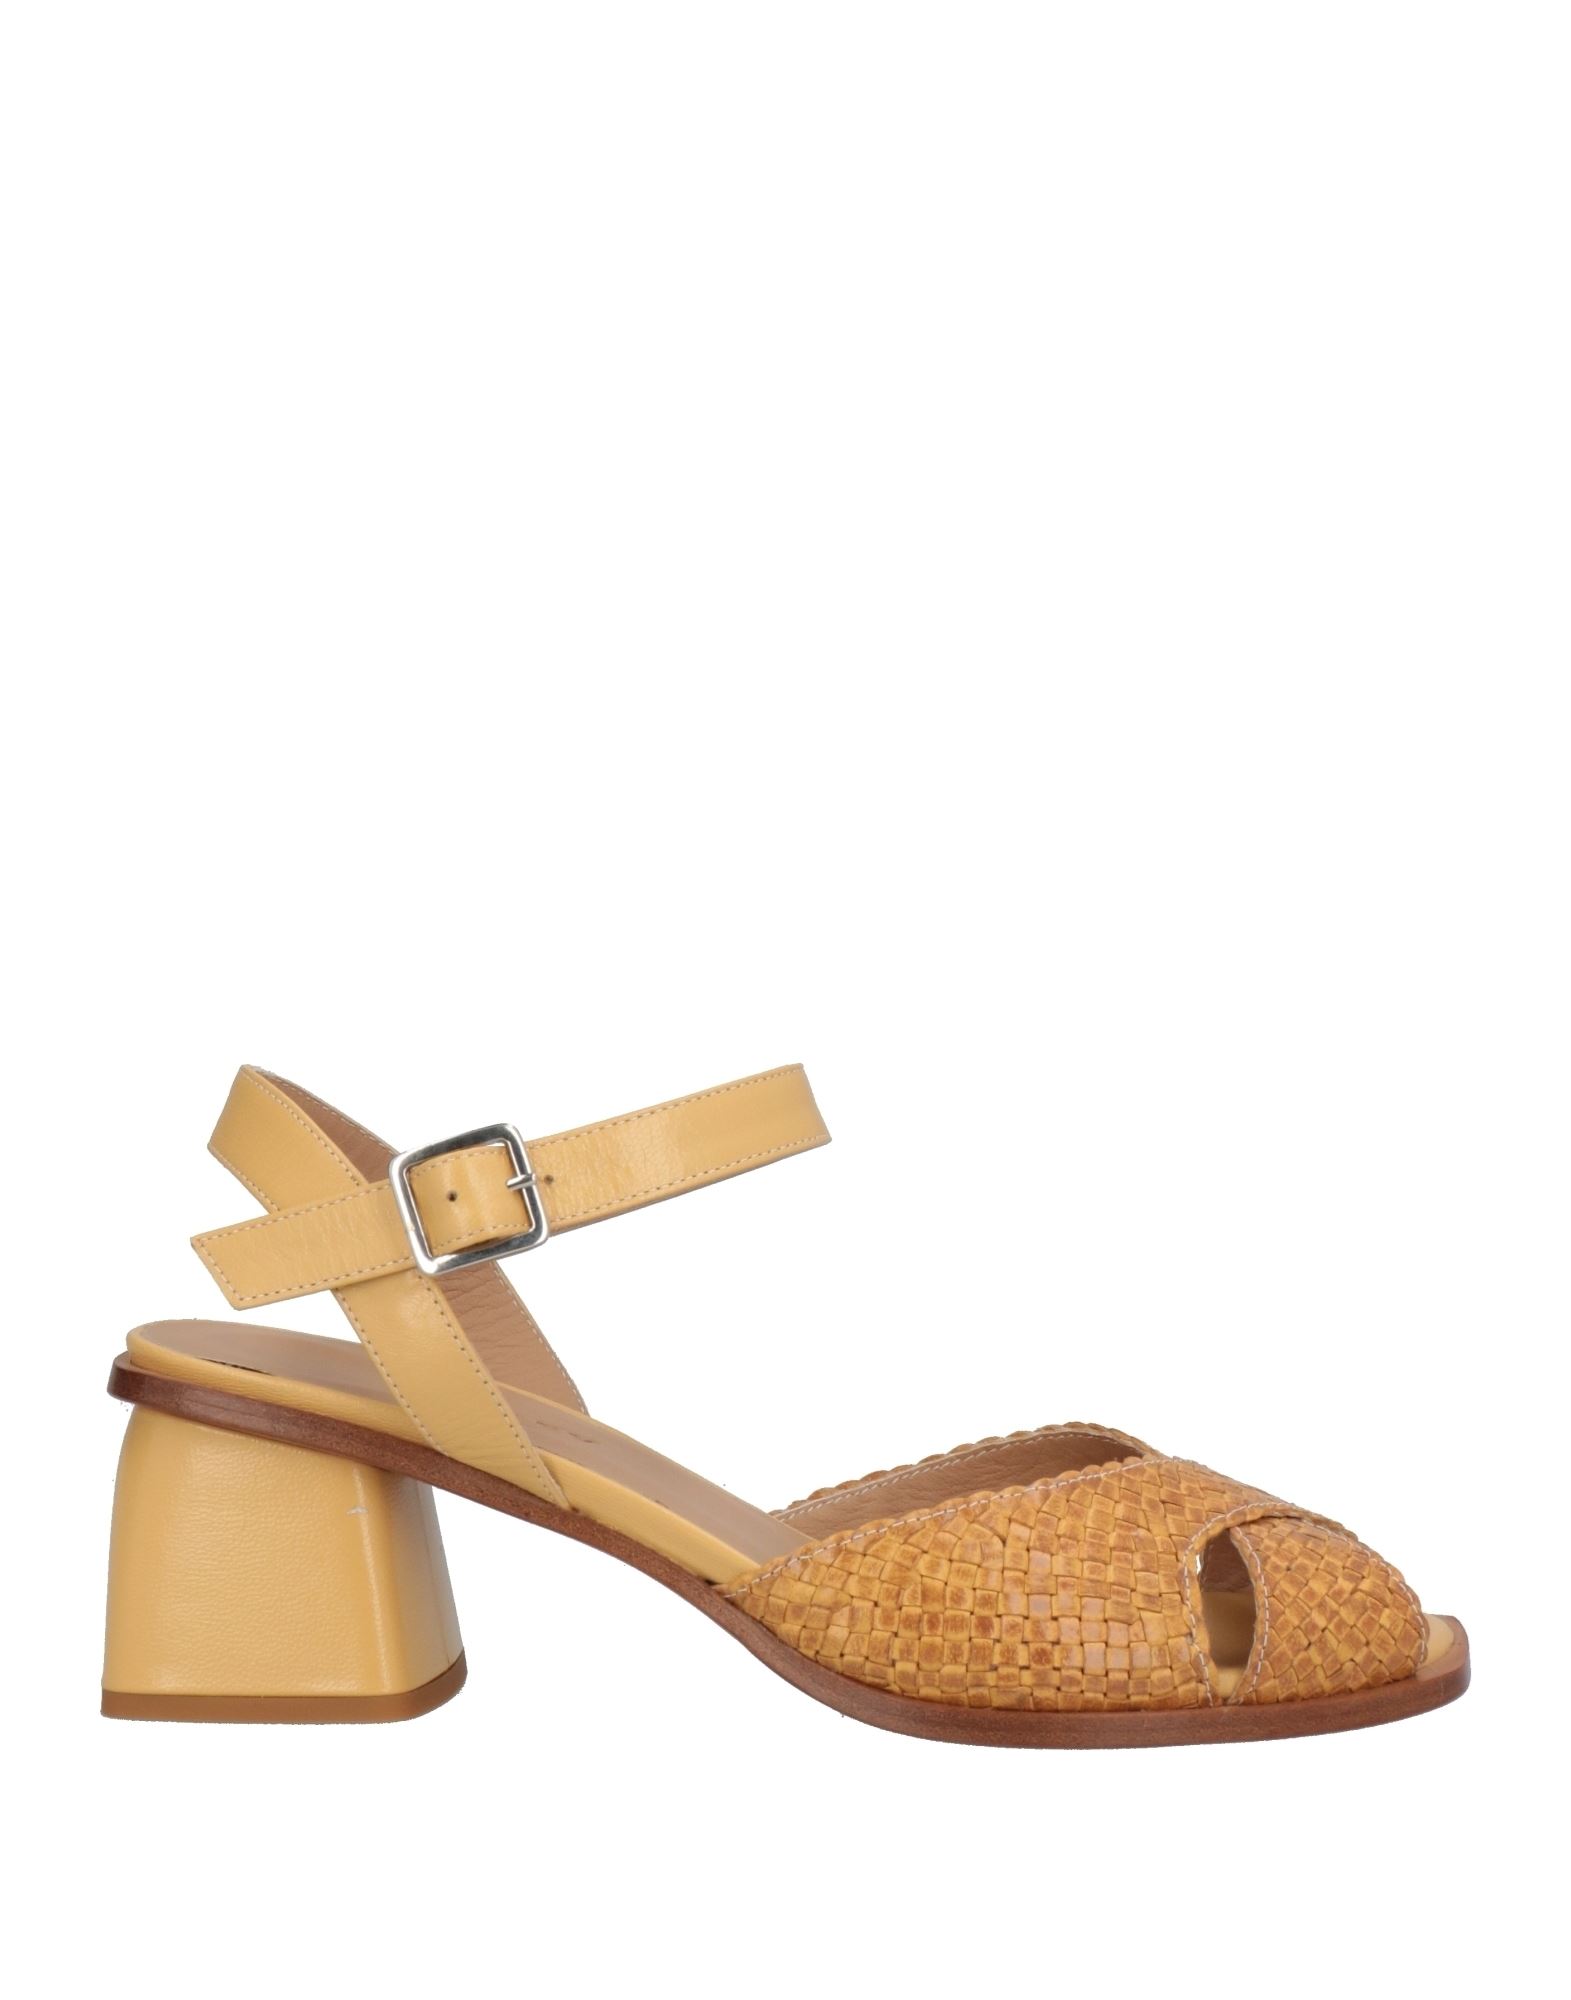 Audley Sandals In Beige